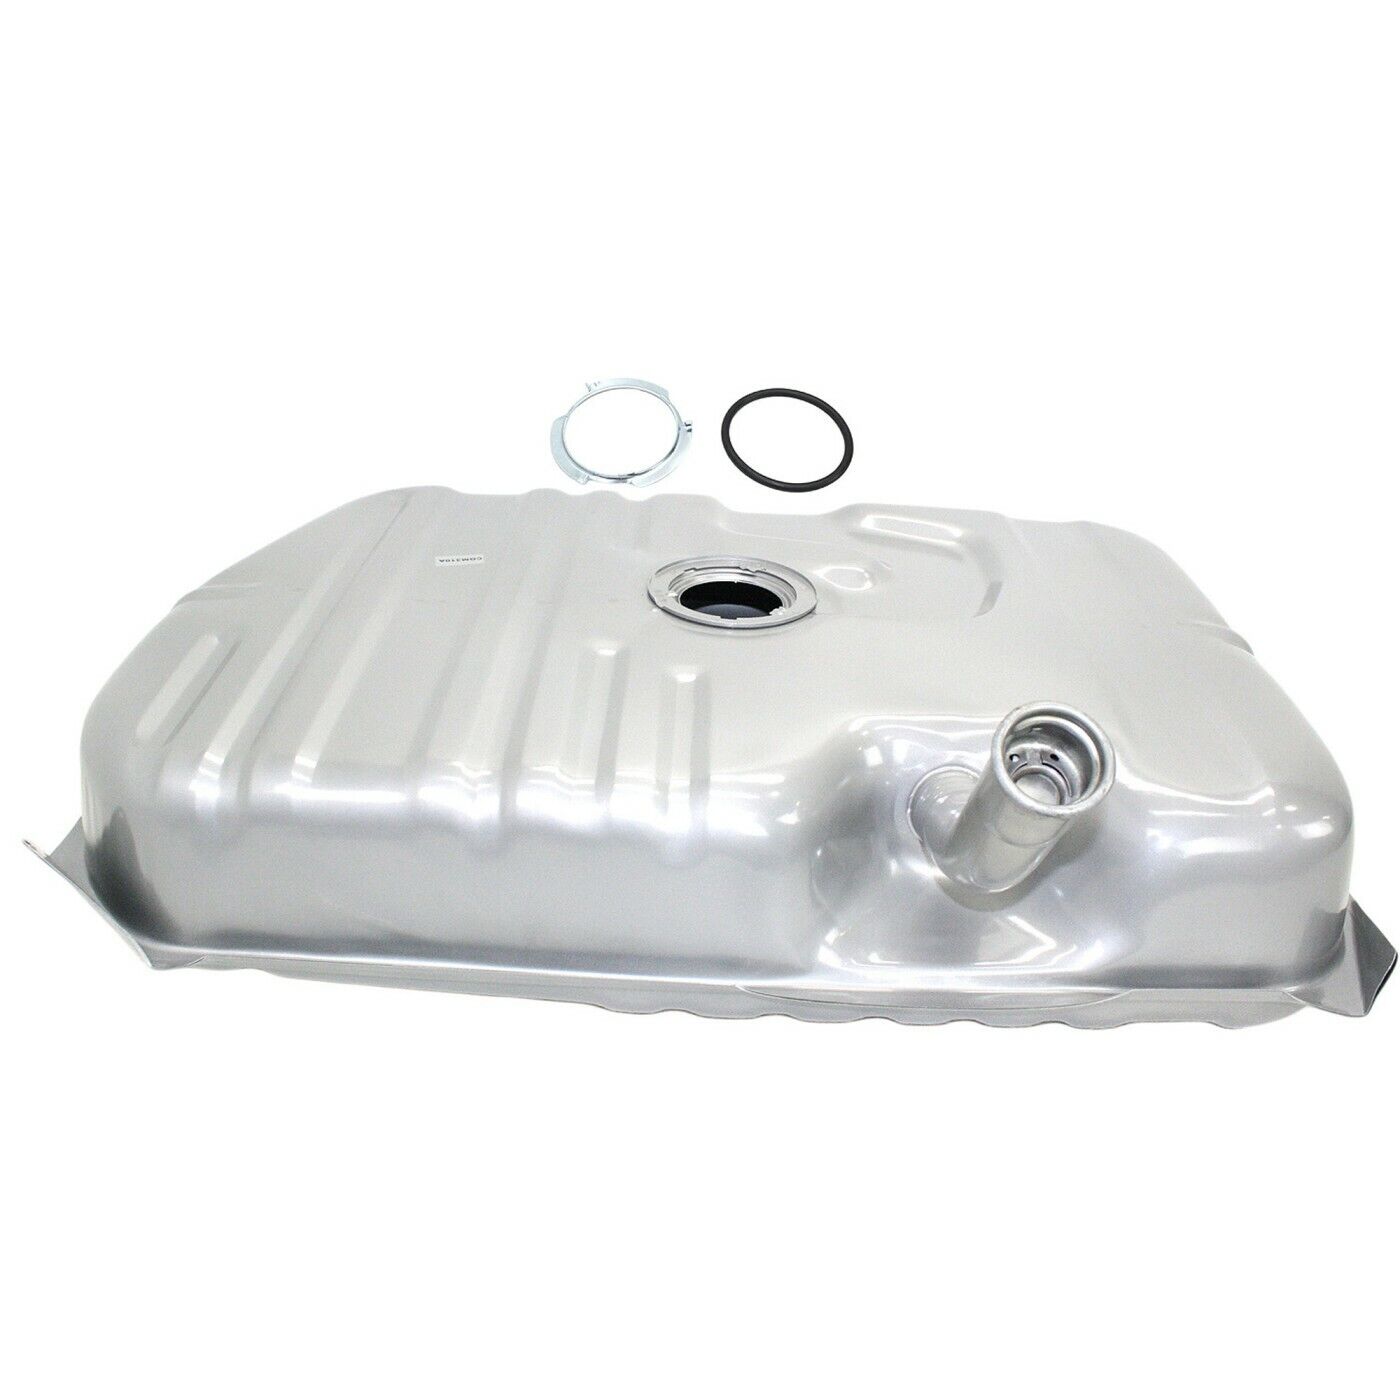 17 Gallon Fuel Gas Tank For 78-80 Oldsmobile Cutlass With Lock Ring Kit Silver